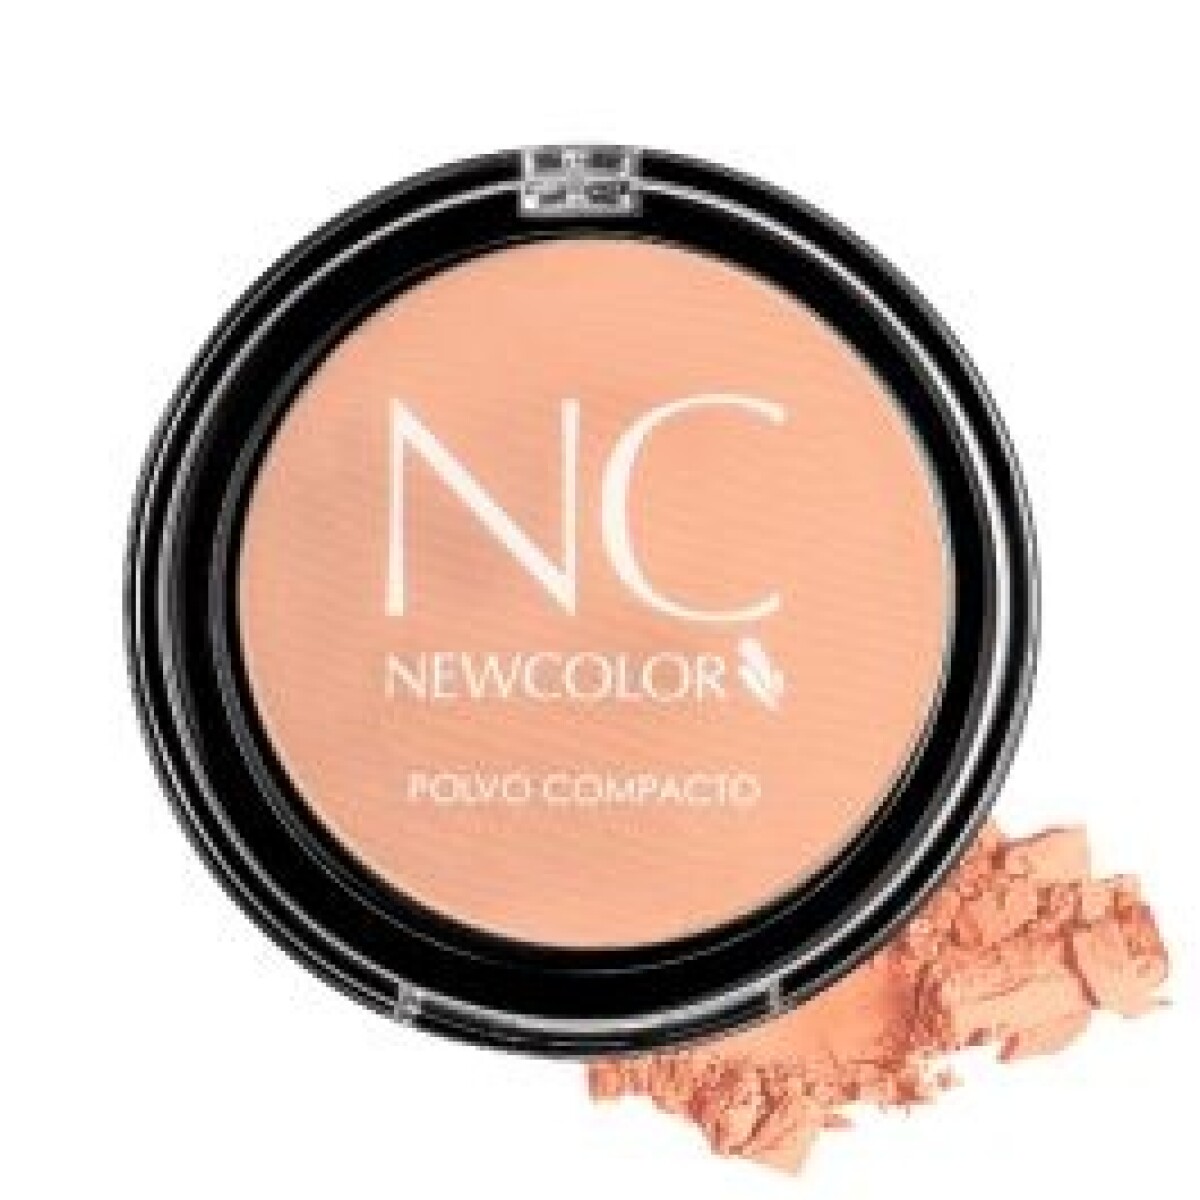 Newcolor Polvo Compacto Classic N 1 Beige 